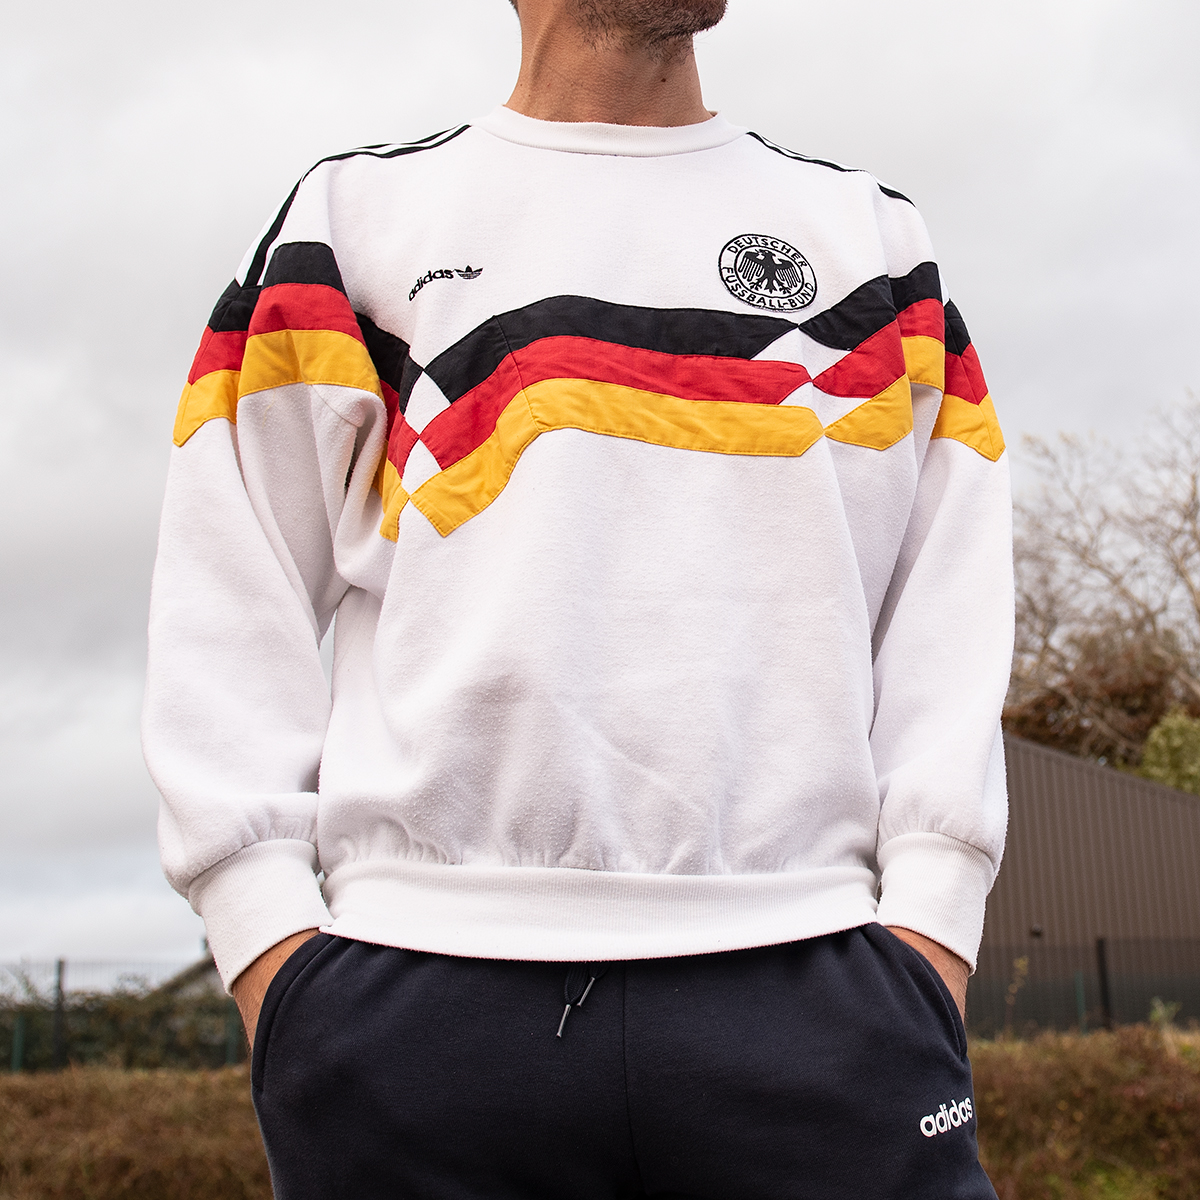 Unión Alrededor vesícula biliar Classic Football Shirts Twitterren: "Germany 1990 Sweat Top by Adidas 🇩🇪  One of the greatest shirt designs, but on a jumper. Not sure it gets any  better. https://t.co/KE23FTeqtl" / Twitter